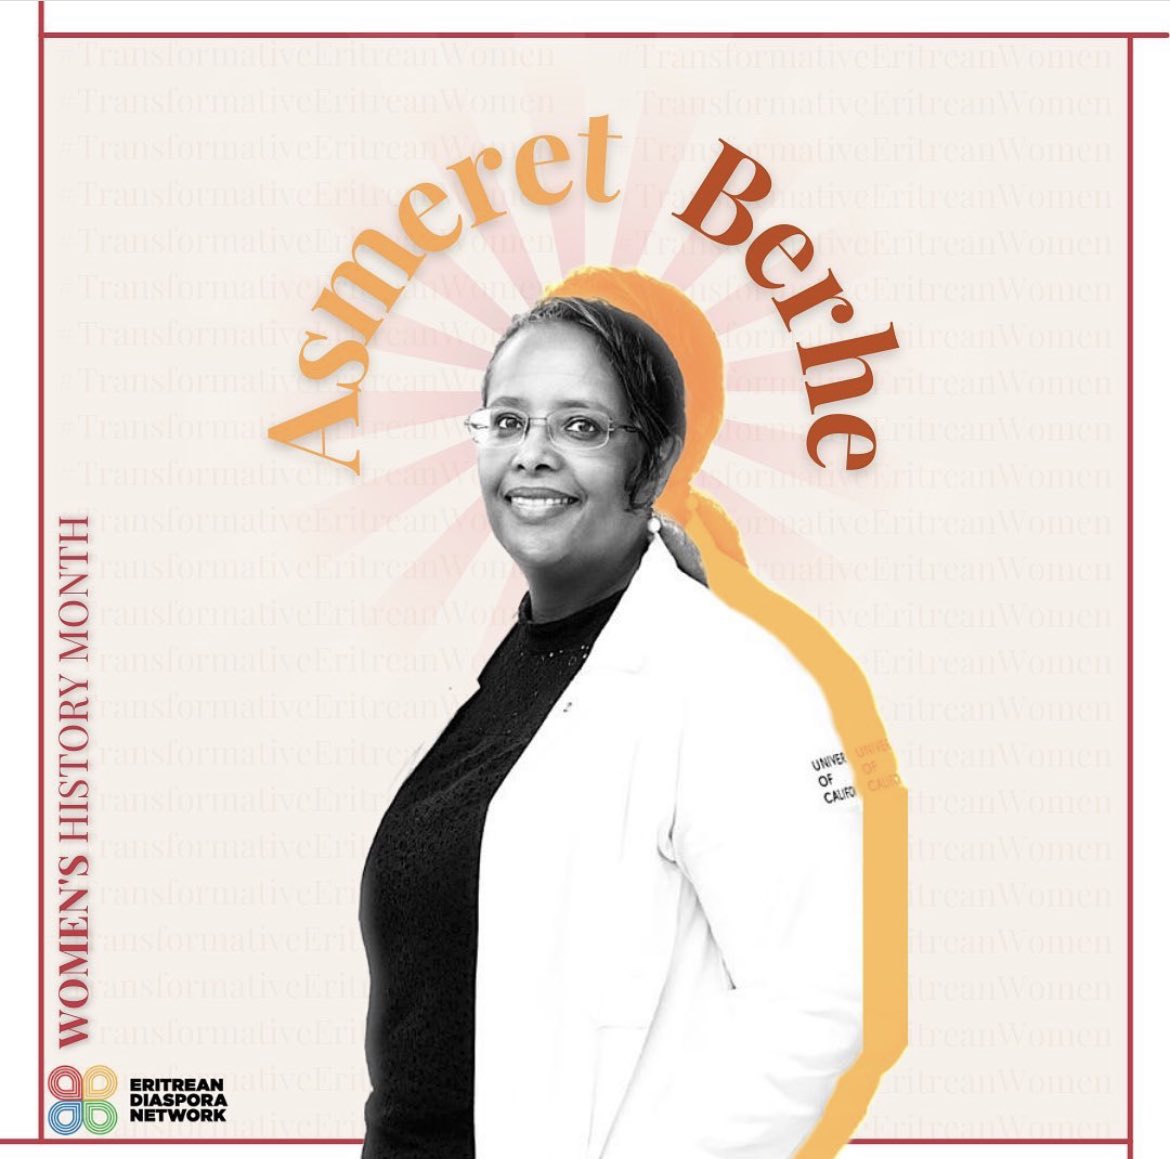 Please join us in honoring Dr. Asmeret Asefaw Berhe,a soil biogeochemist & political ecologist who is the current nominee to serve as the Director of the Office of Science at the US Department of Energy. @aaberhe 
#WomensHistoryMonth #EritreanWomen #transformativeeritreanwomen